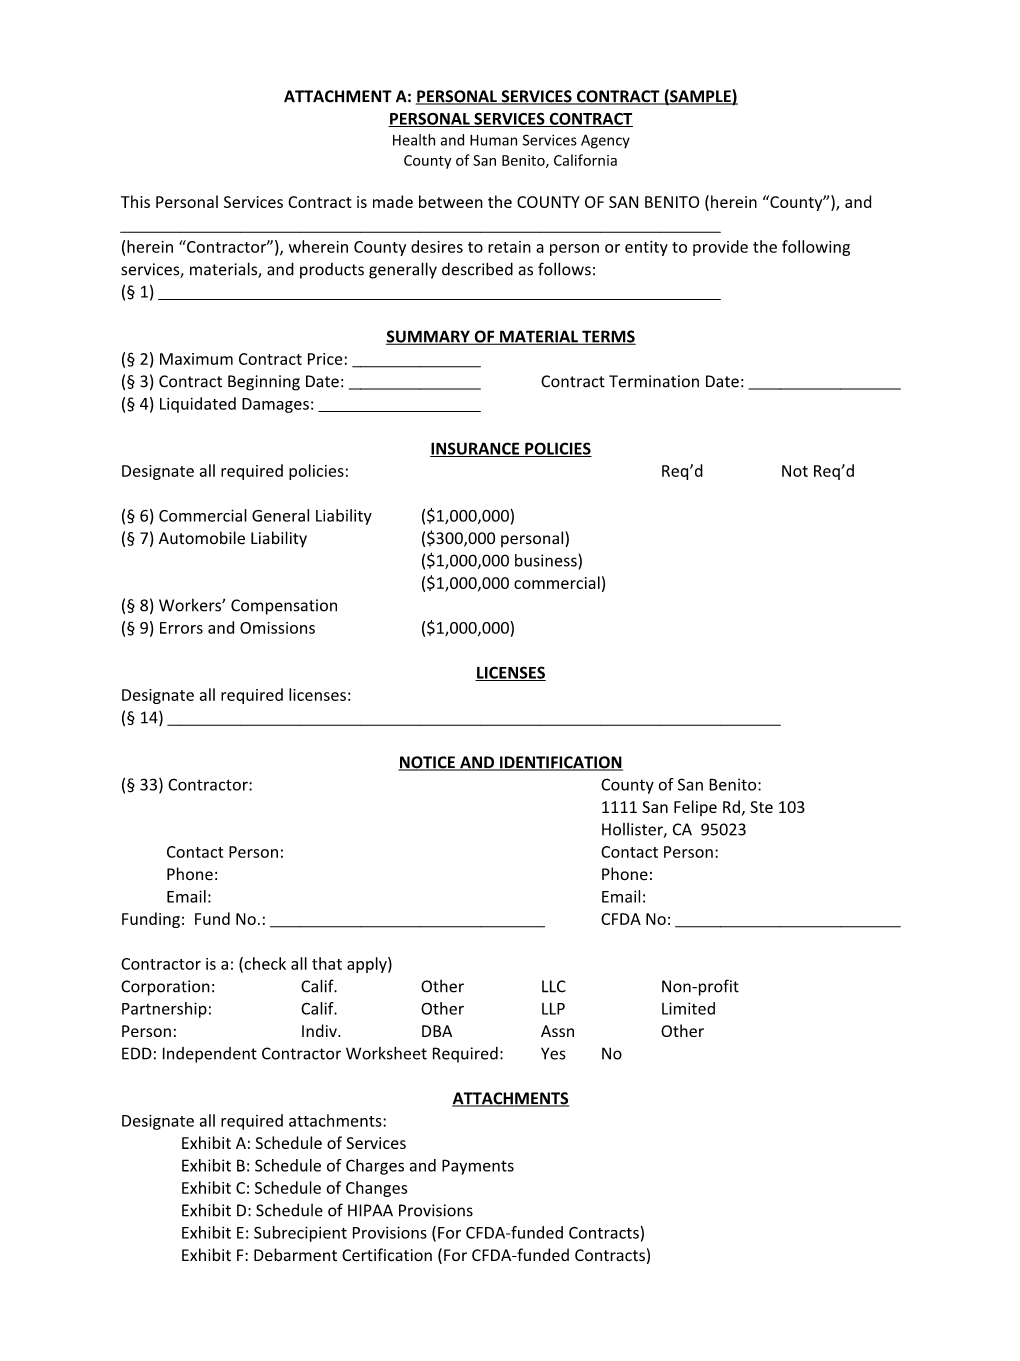 Attachment A: Personal Services Contract (Sample)